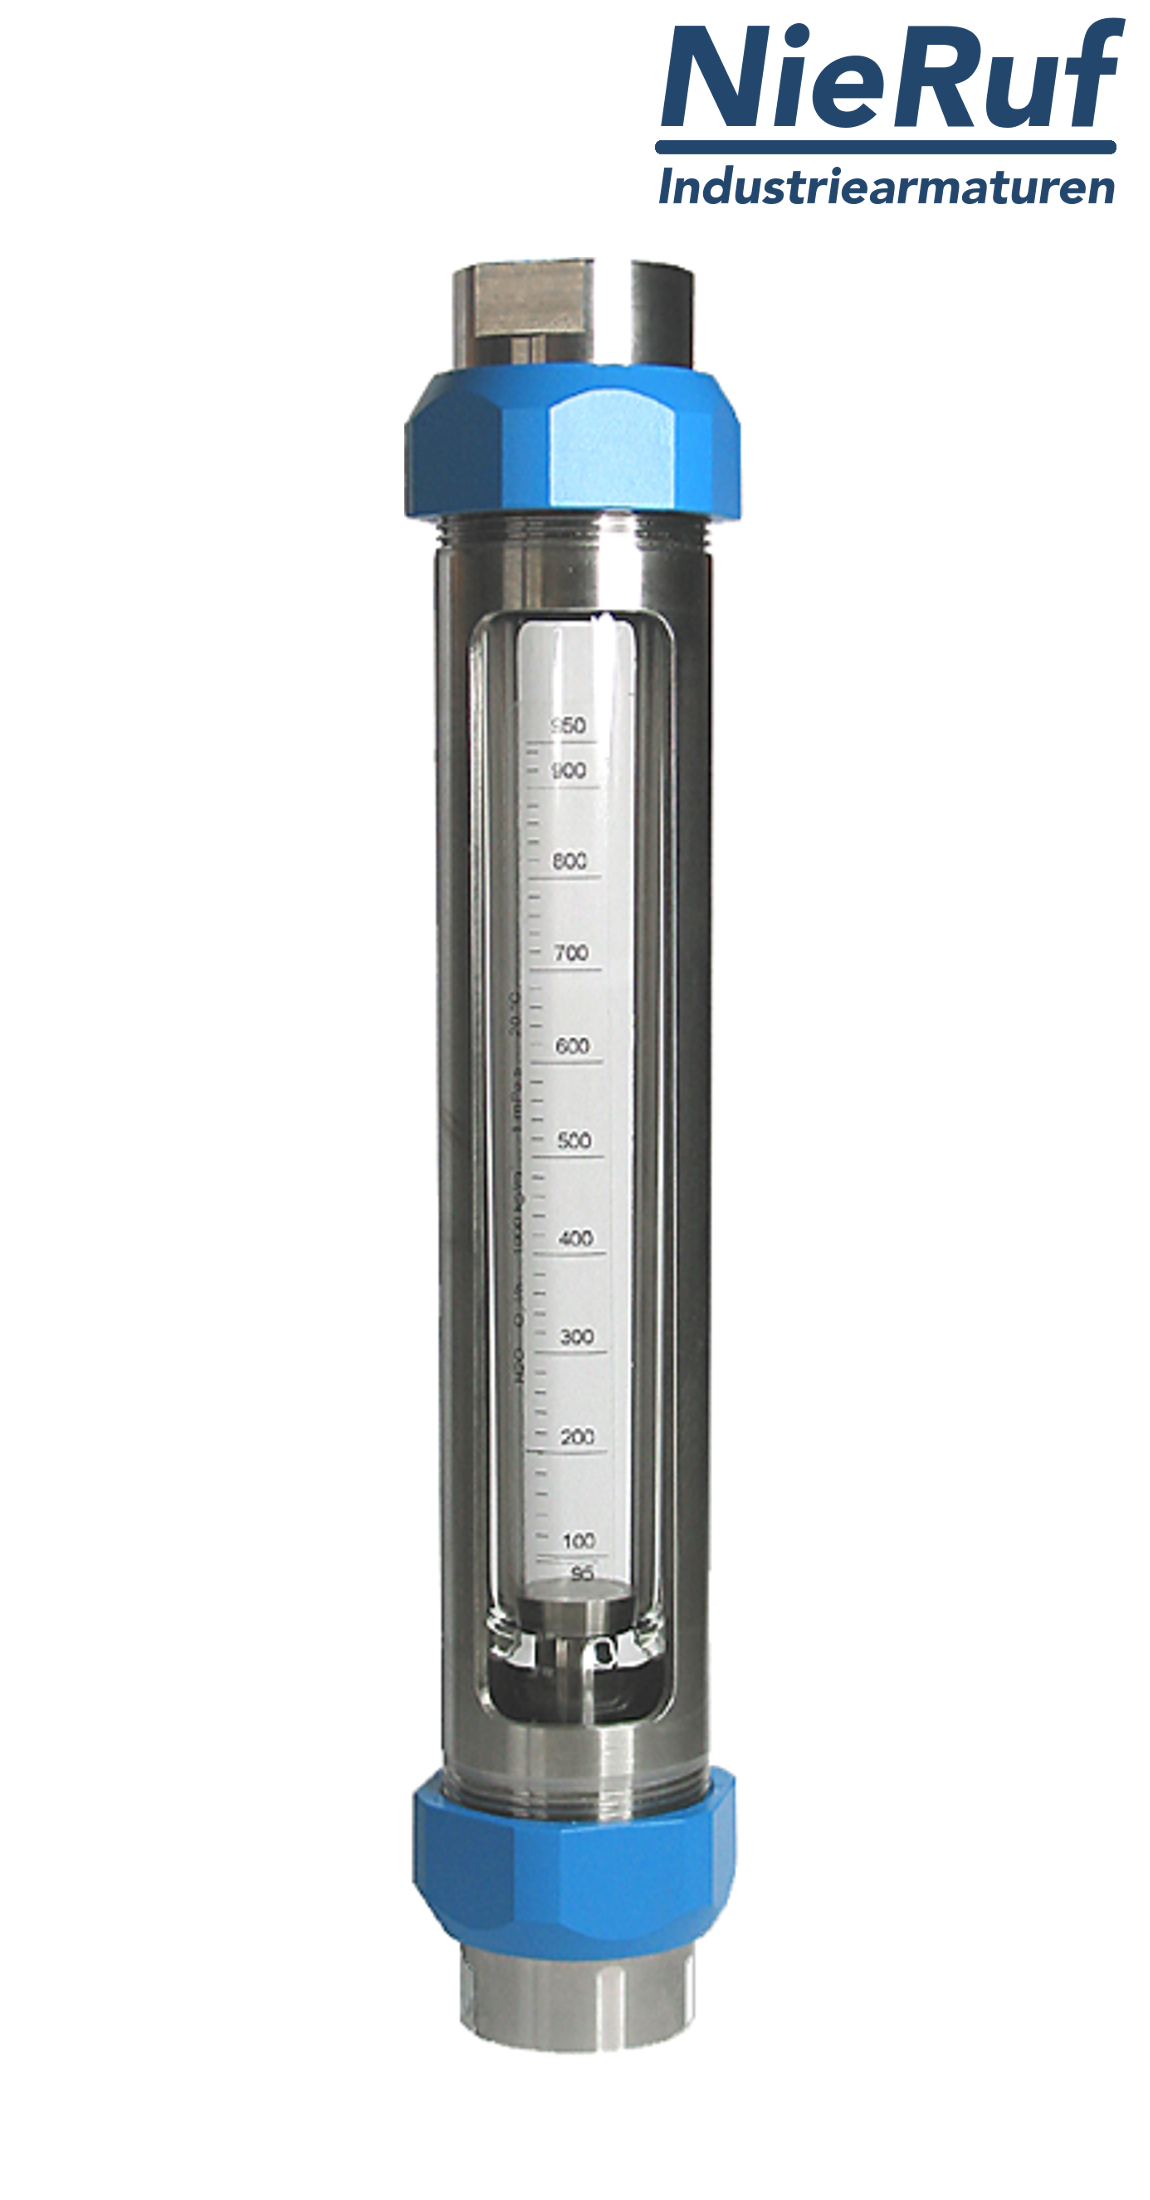 Variable area flowmeter stainless steel + borosilicate 2" inch 500.0 - 5000 l/h water EPDM